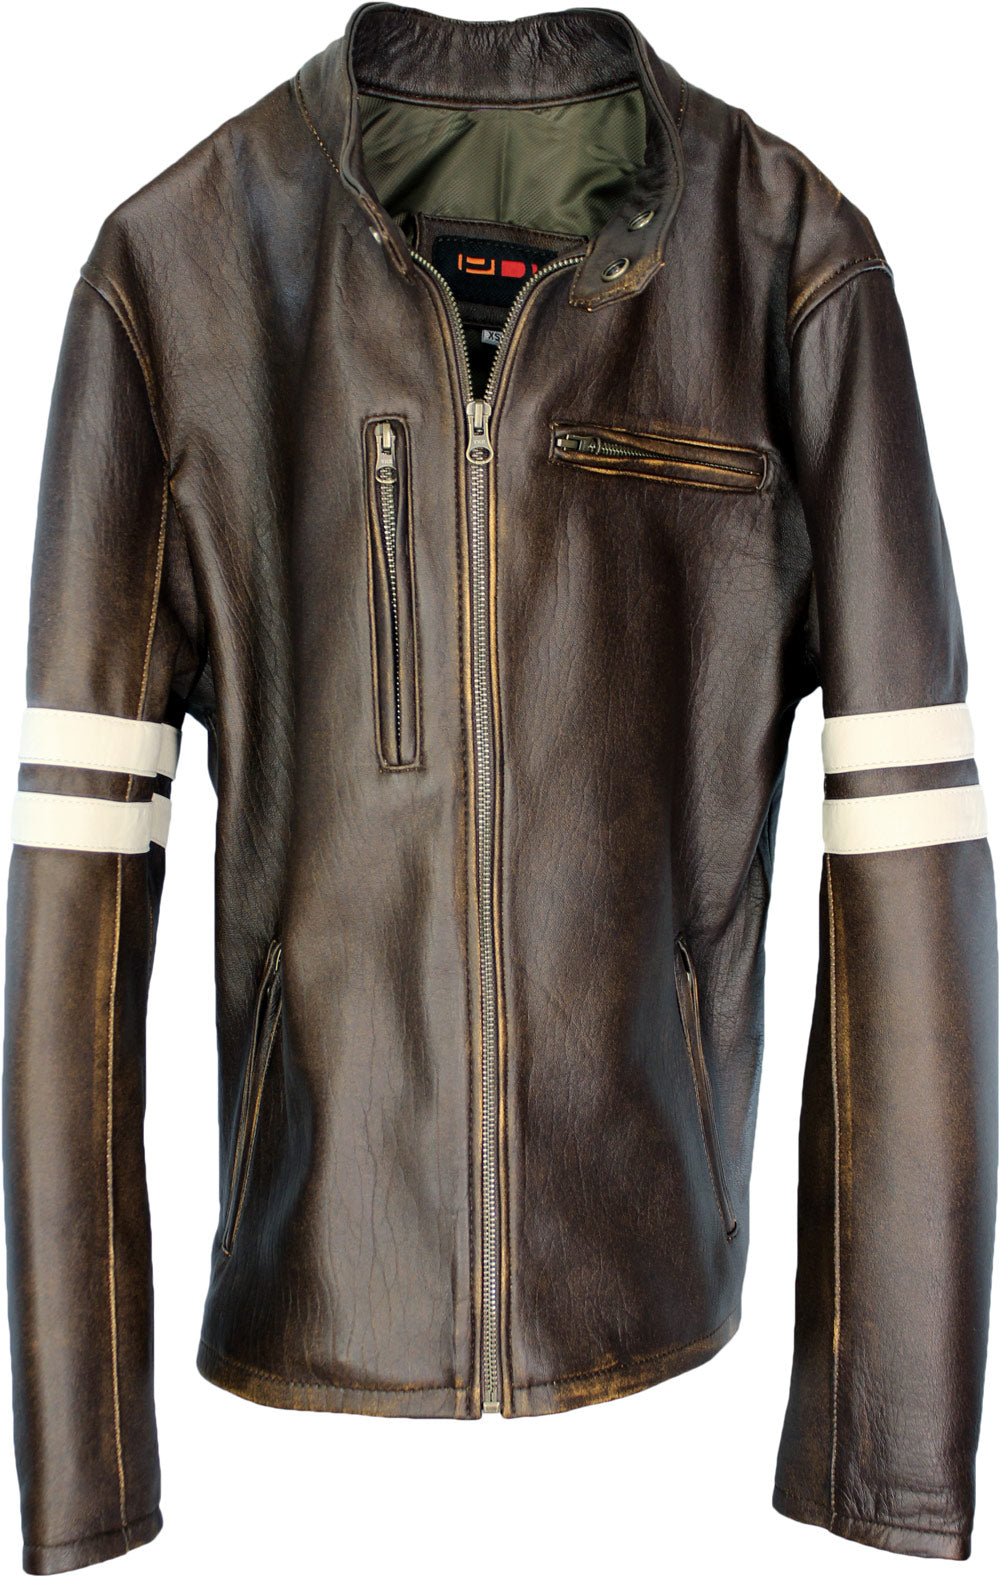 Online Leather Racer - MUSTANG Brown Leatherwear Jacket Shop Cafe - PDCollection Stripes– Distressed